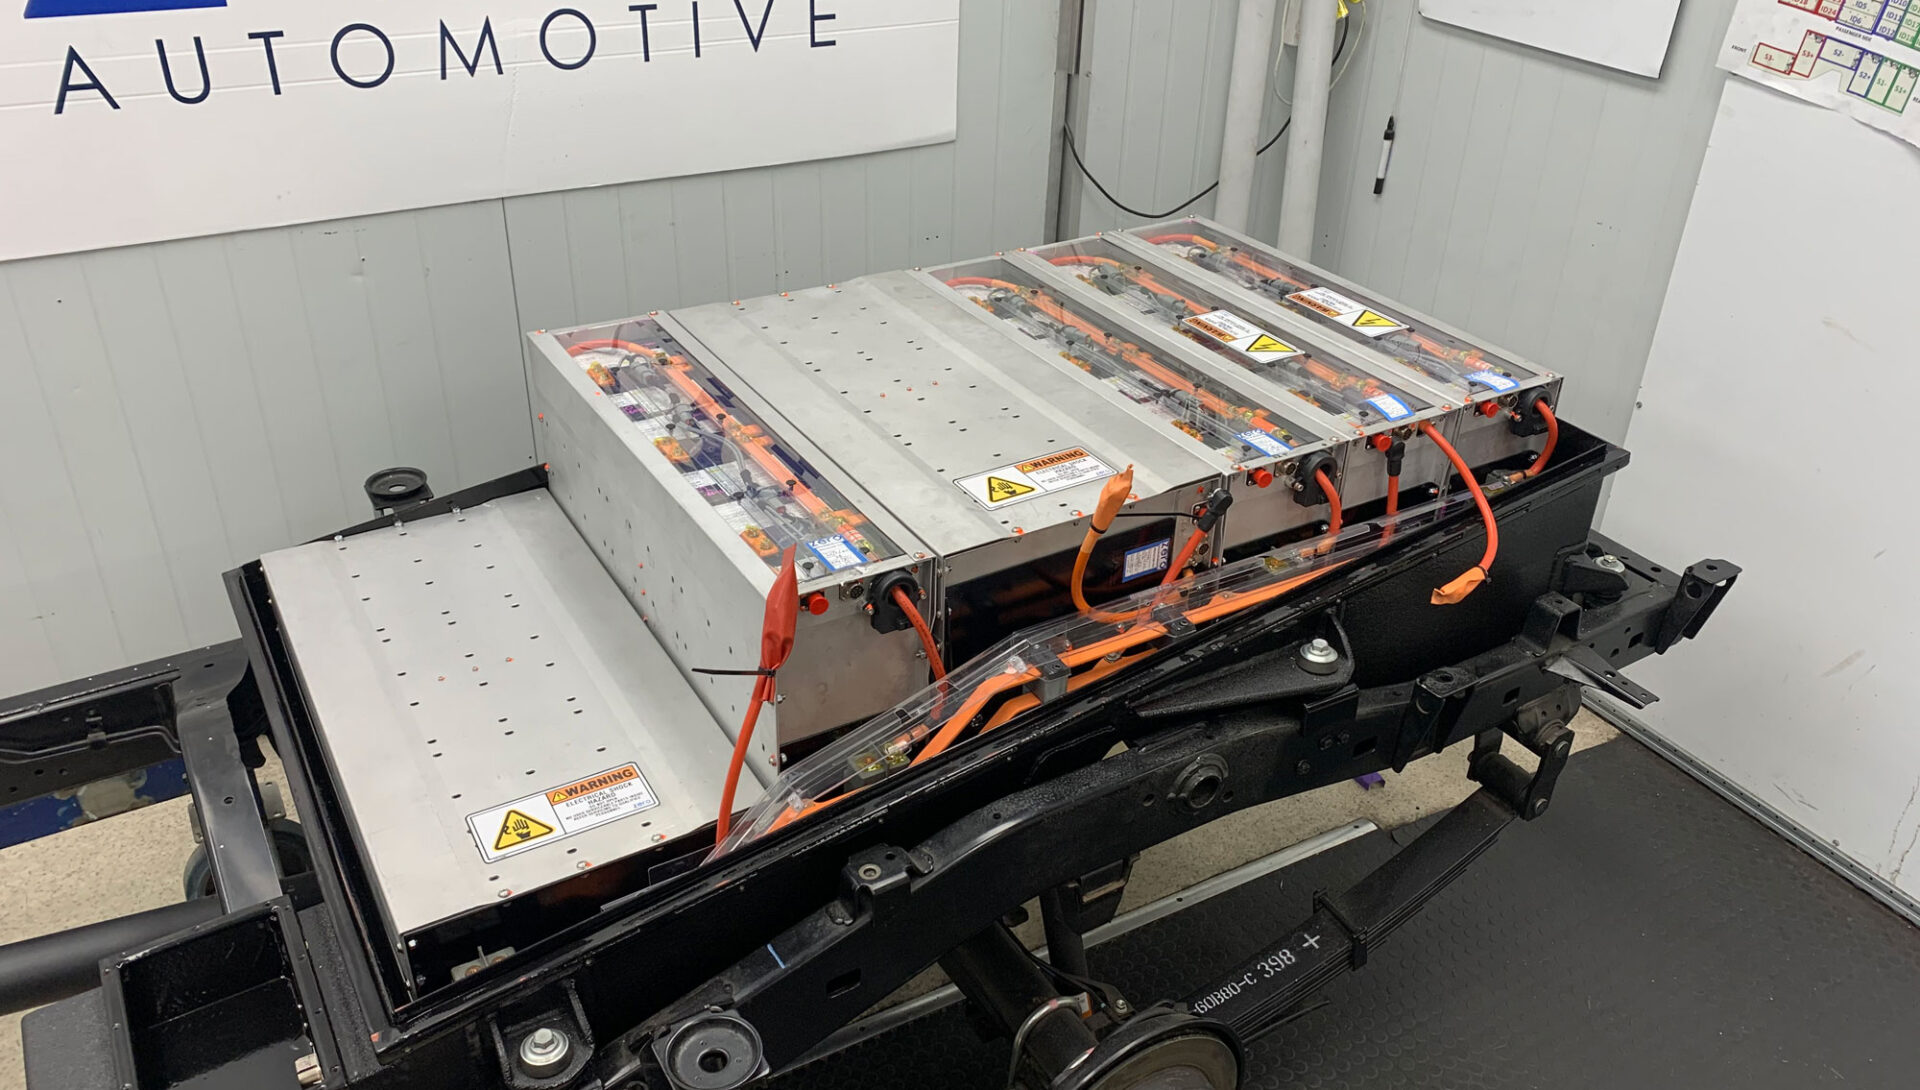 LTO and NCM battery chemistries